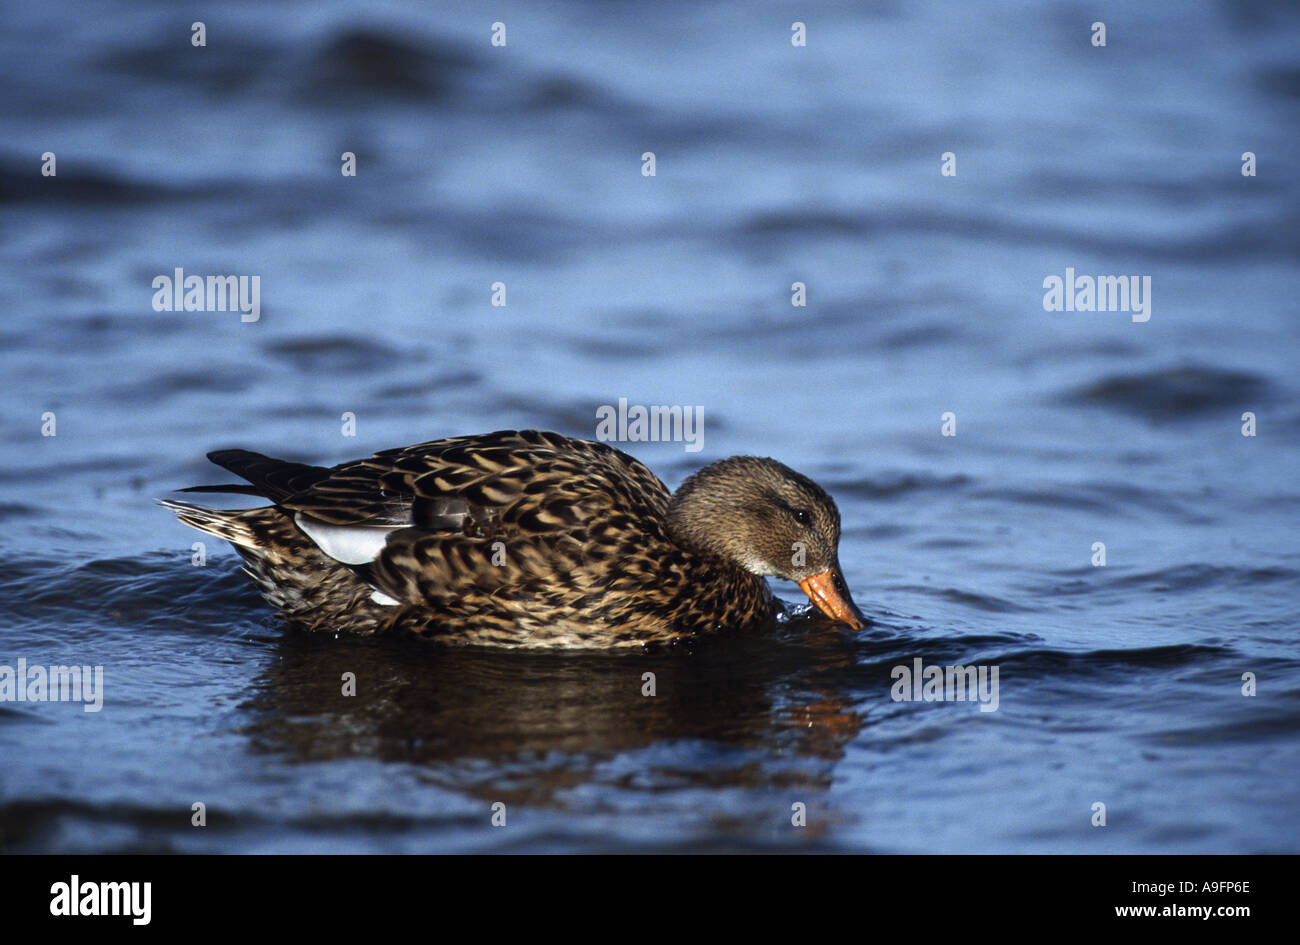 gadwall (Anas strepera), female searching food , Germany, Schleswig-Holstein, NP Schleswig-Holsteinisches Wattenmeer, Apr 01. Stock Photo